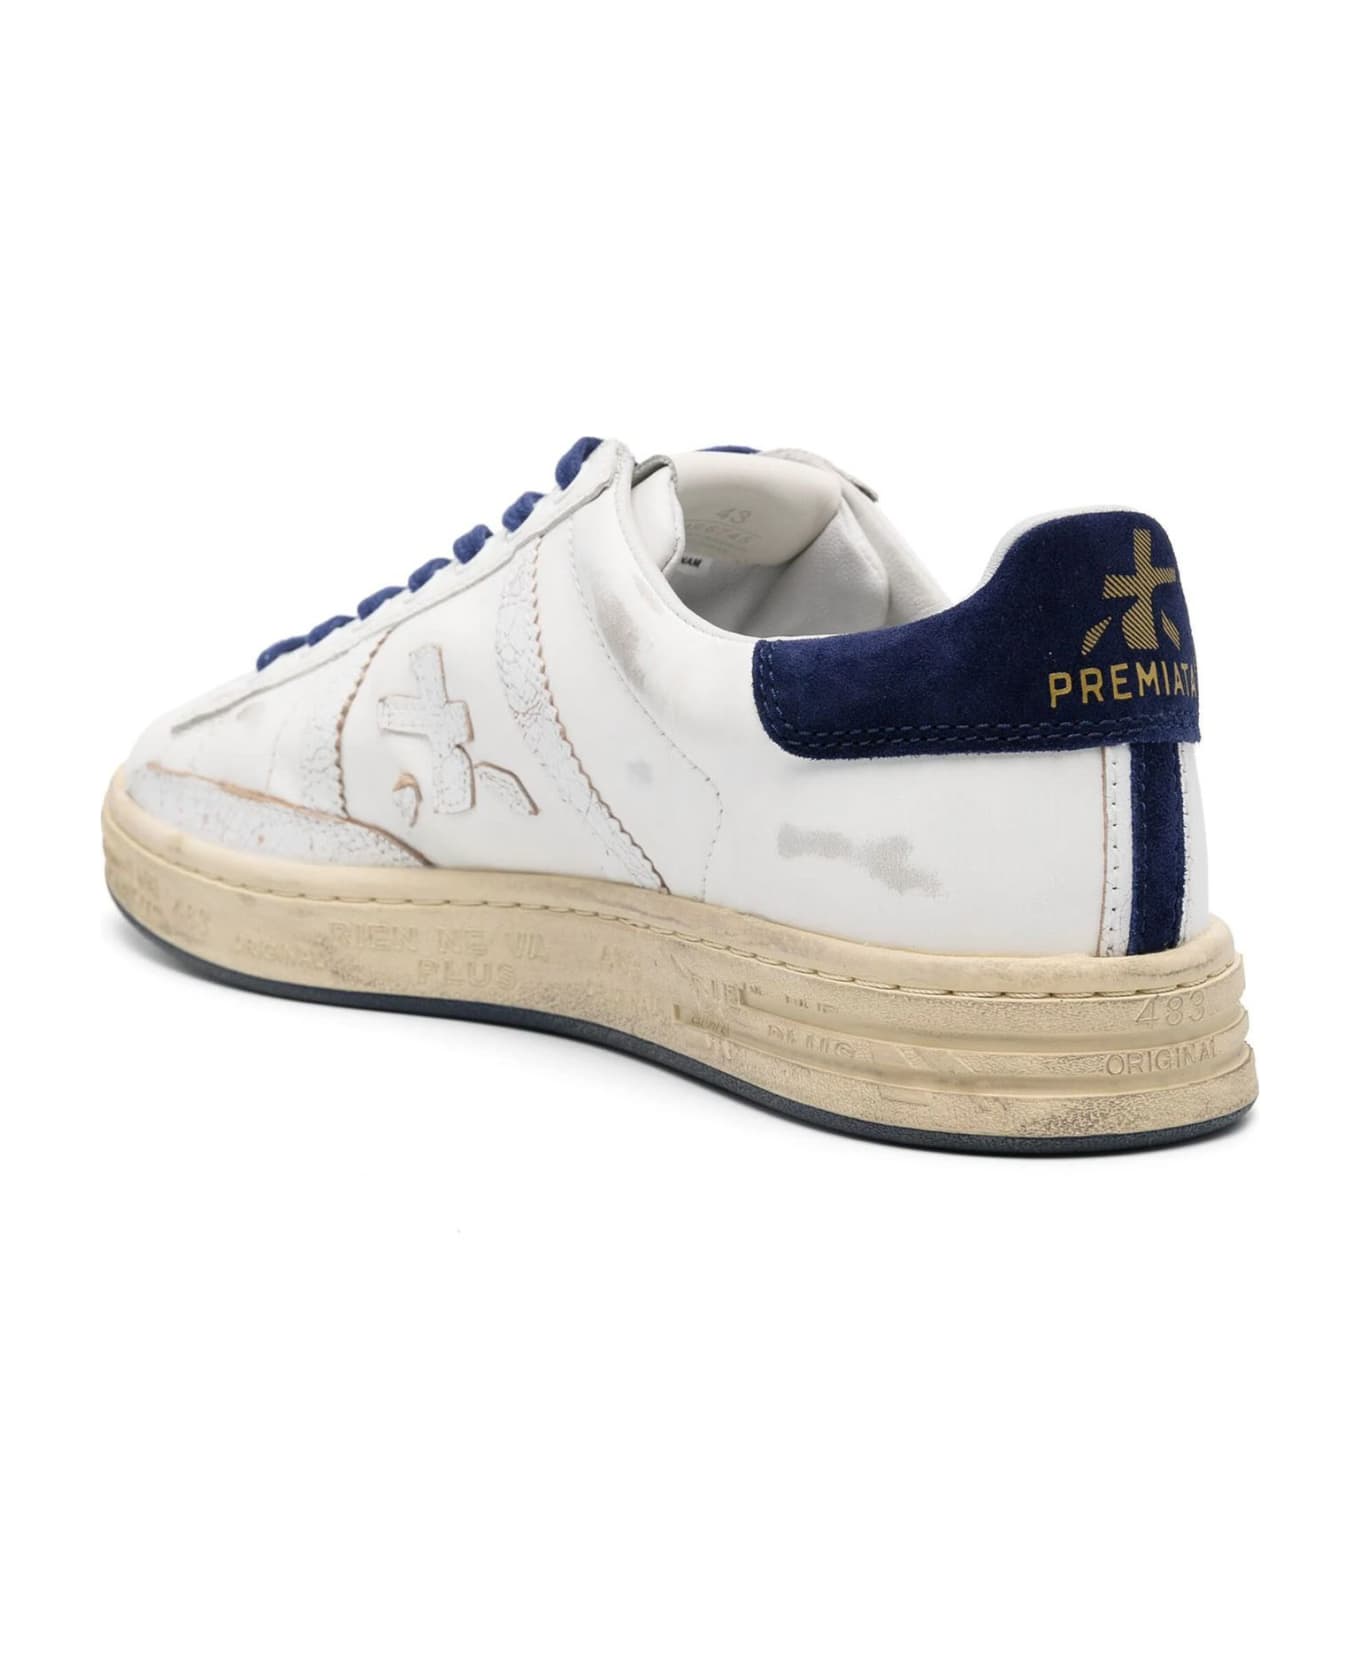 Premiata 'russell' White Leather Sneakers - Off White スニーカー